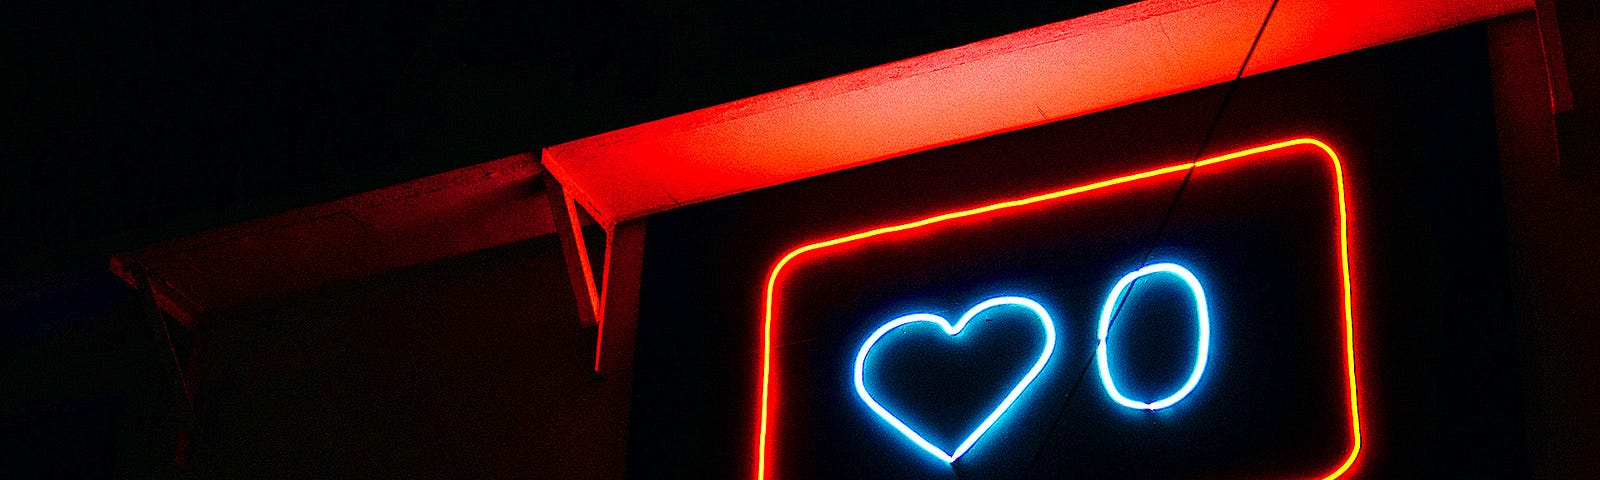 Neon sign in the shape of a like and comment button.